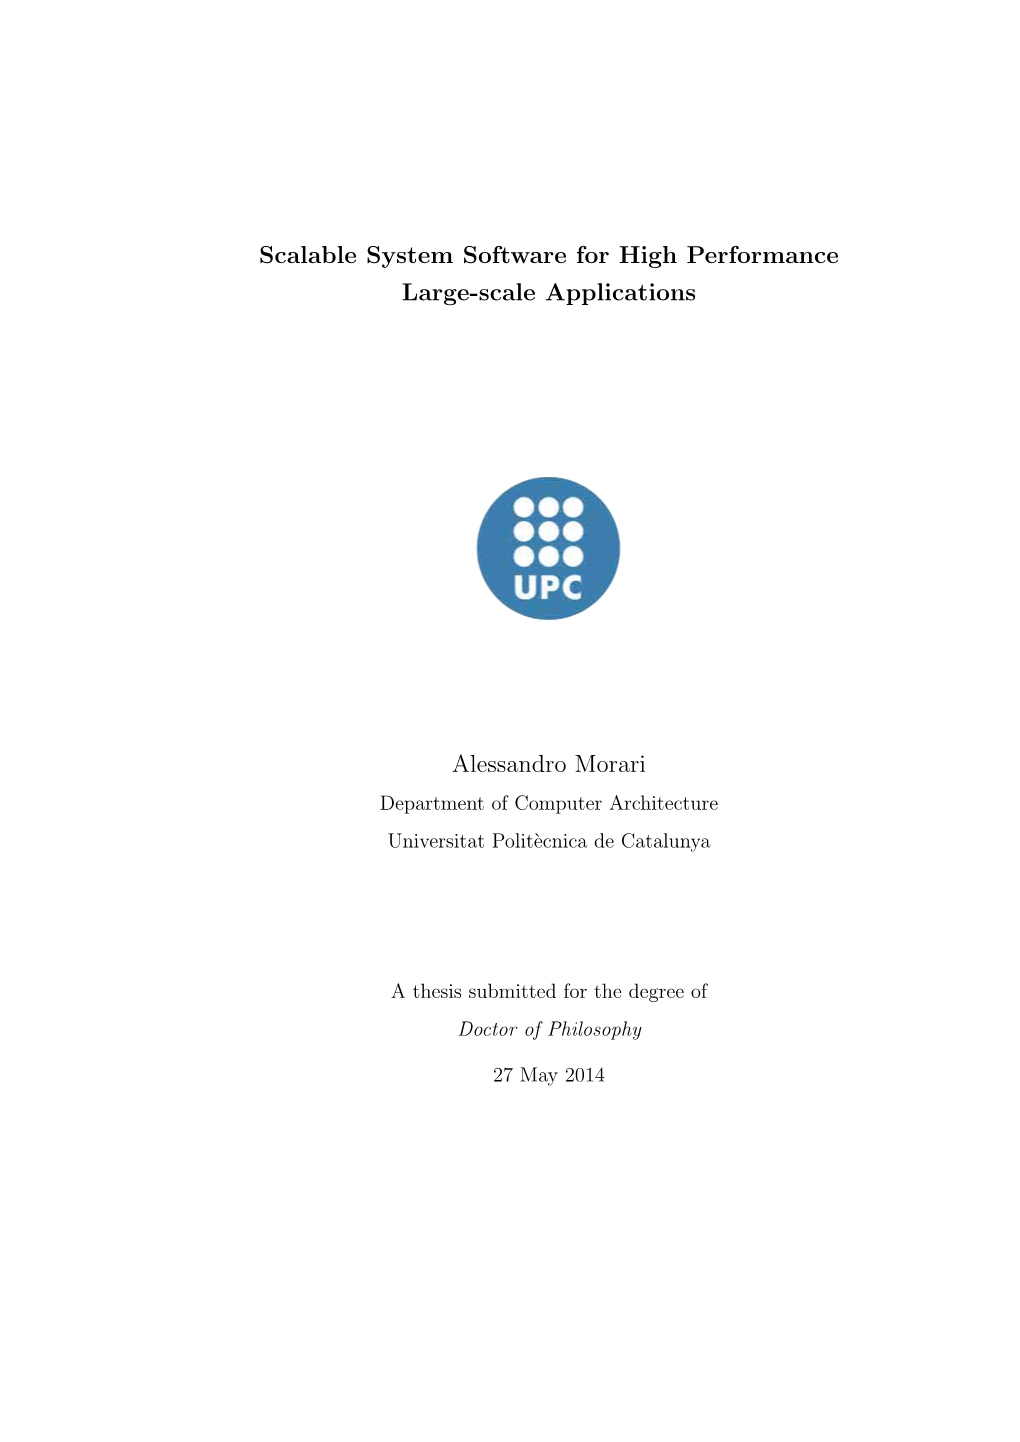 Scalable System Software for High Performance Large-Scale Applications